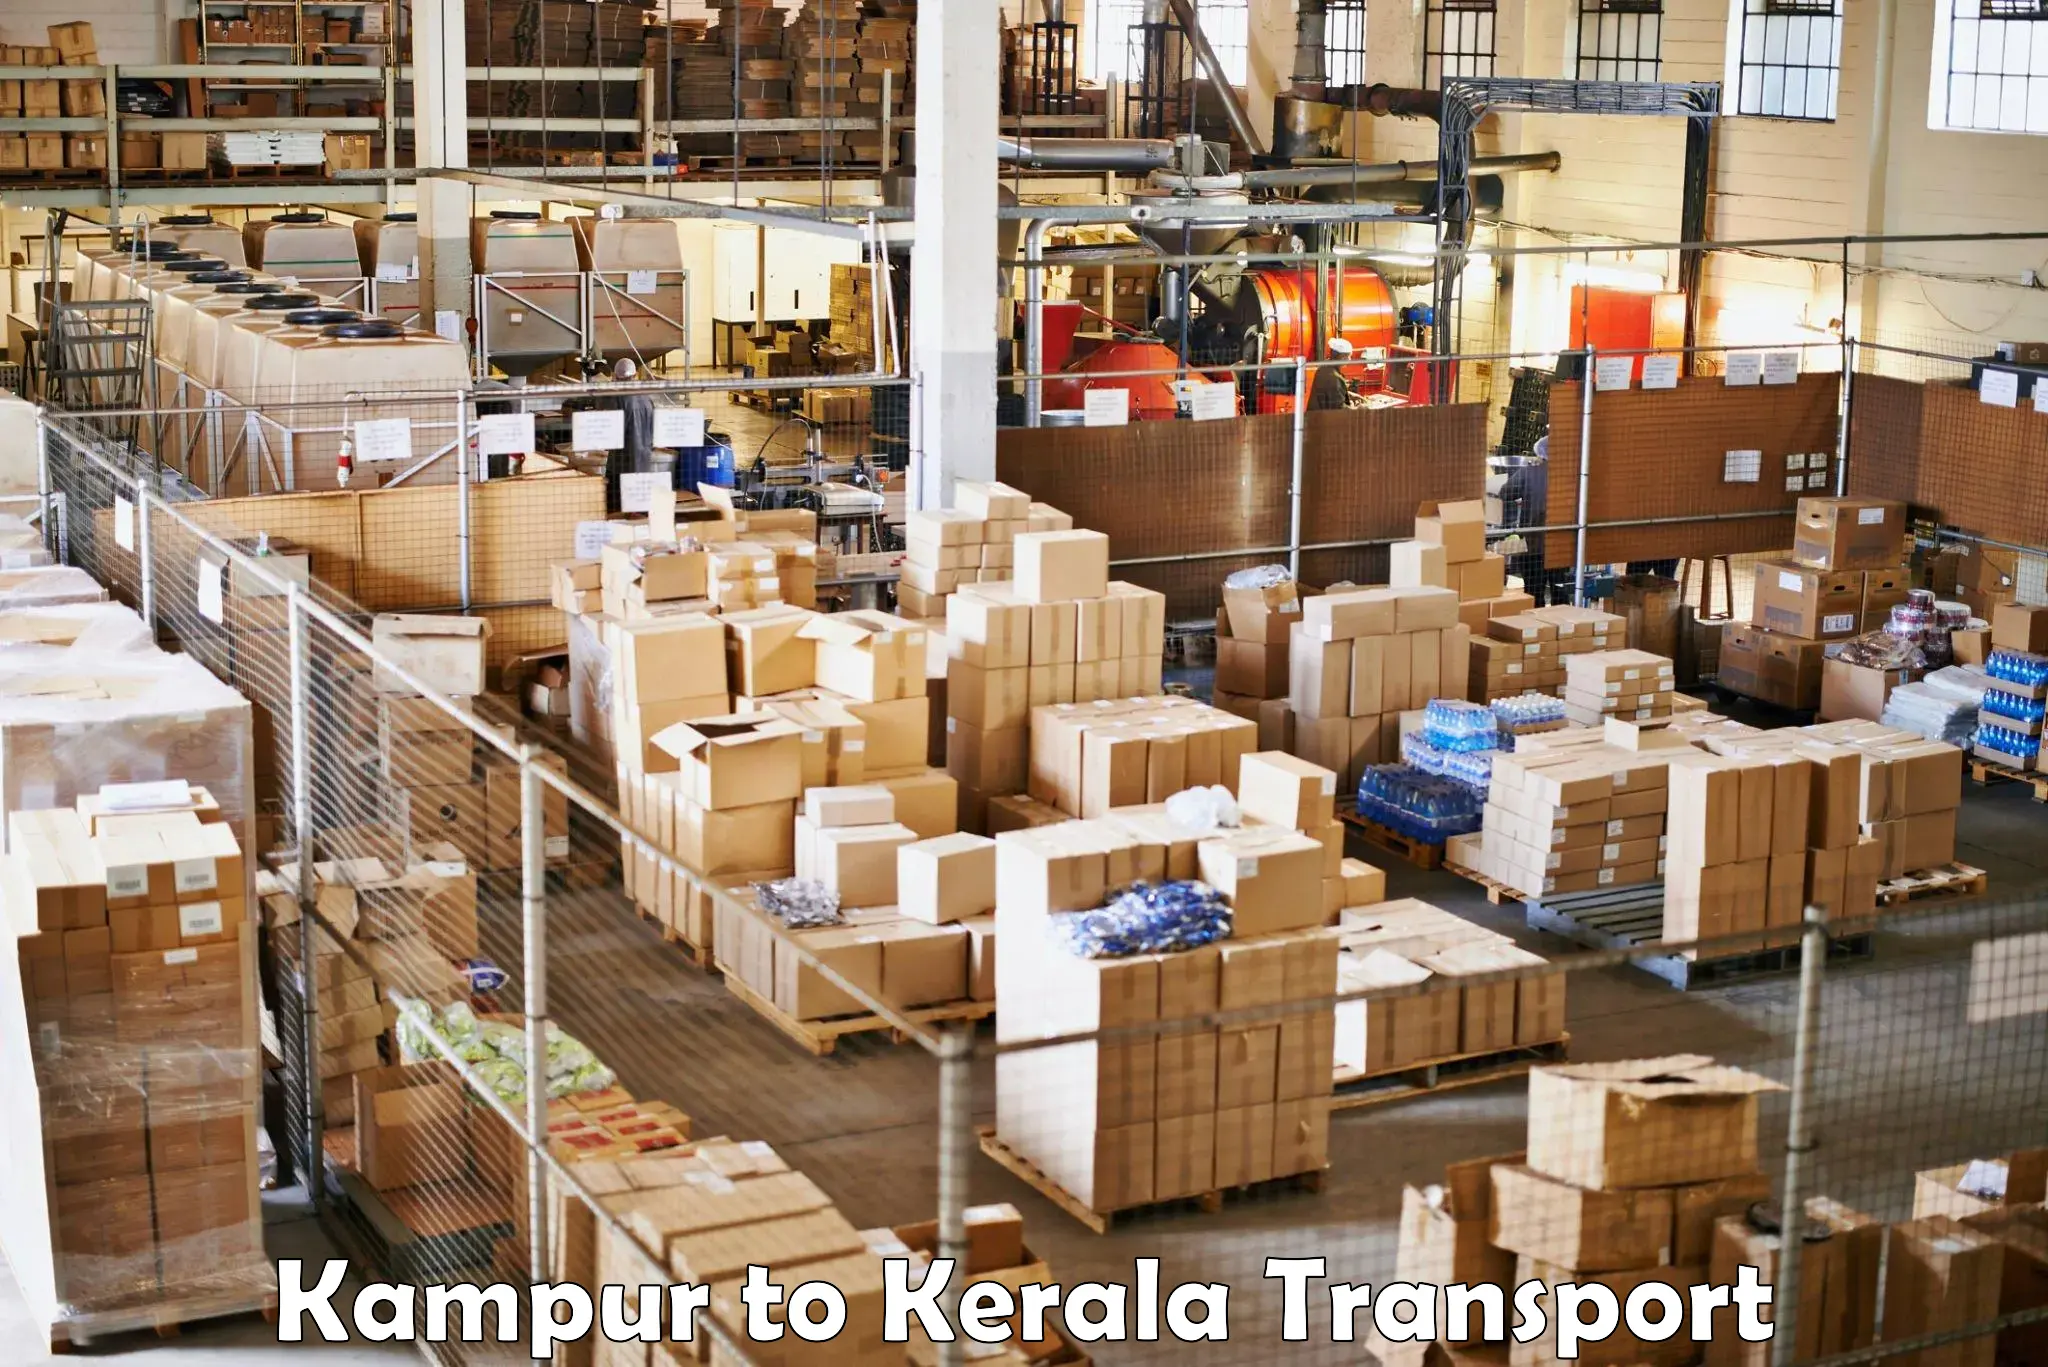 Daily parcel service transport Kampur to Anjumoorthy